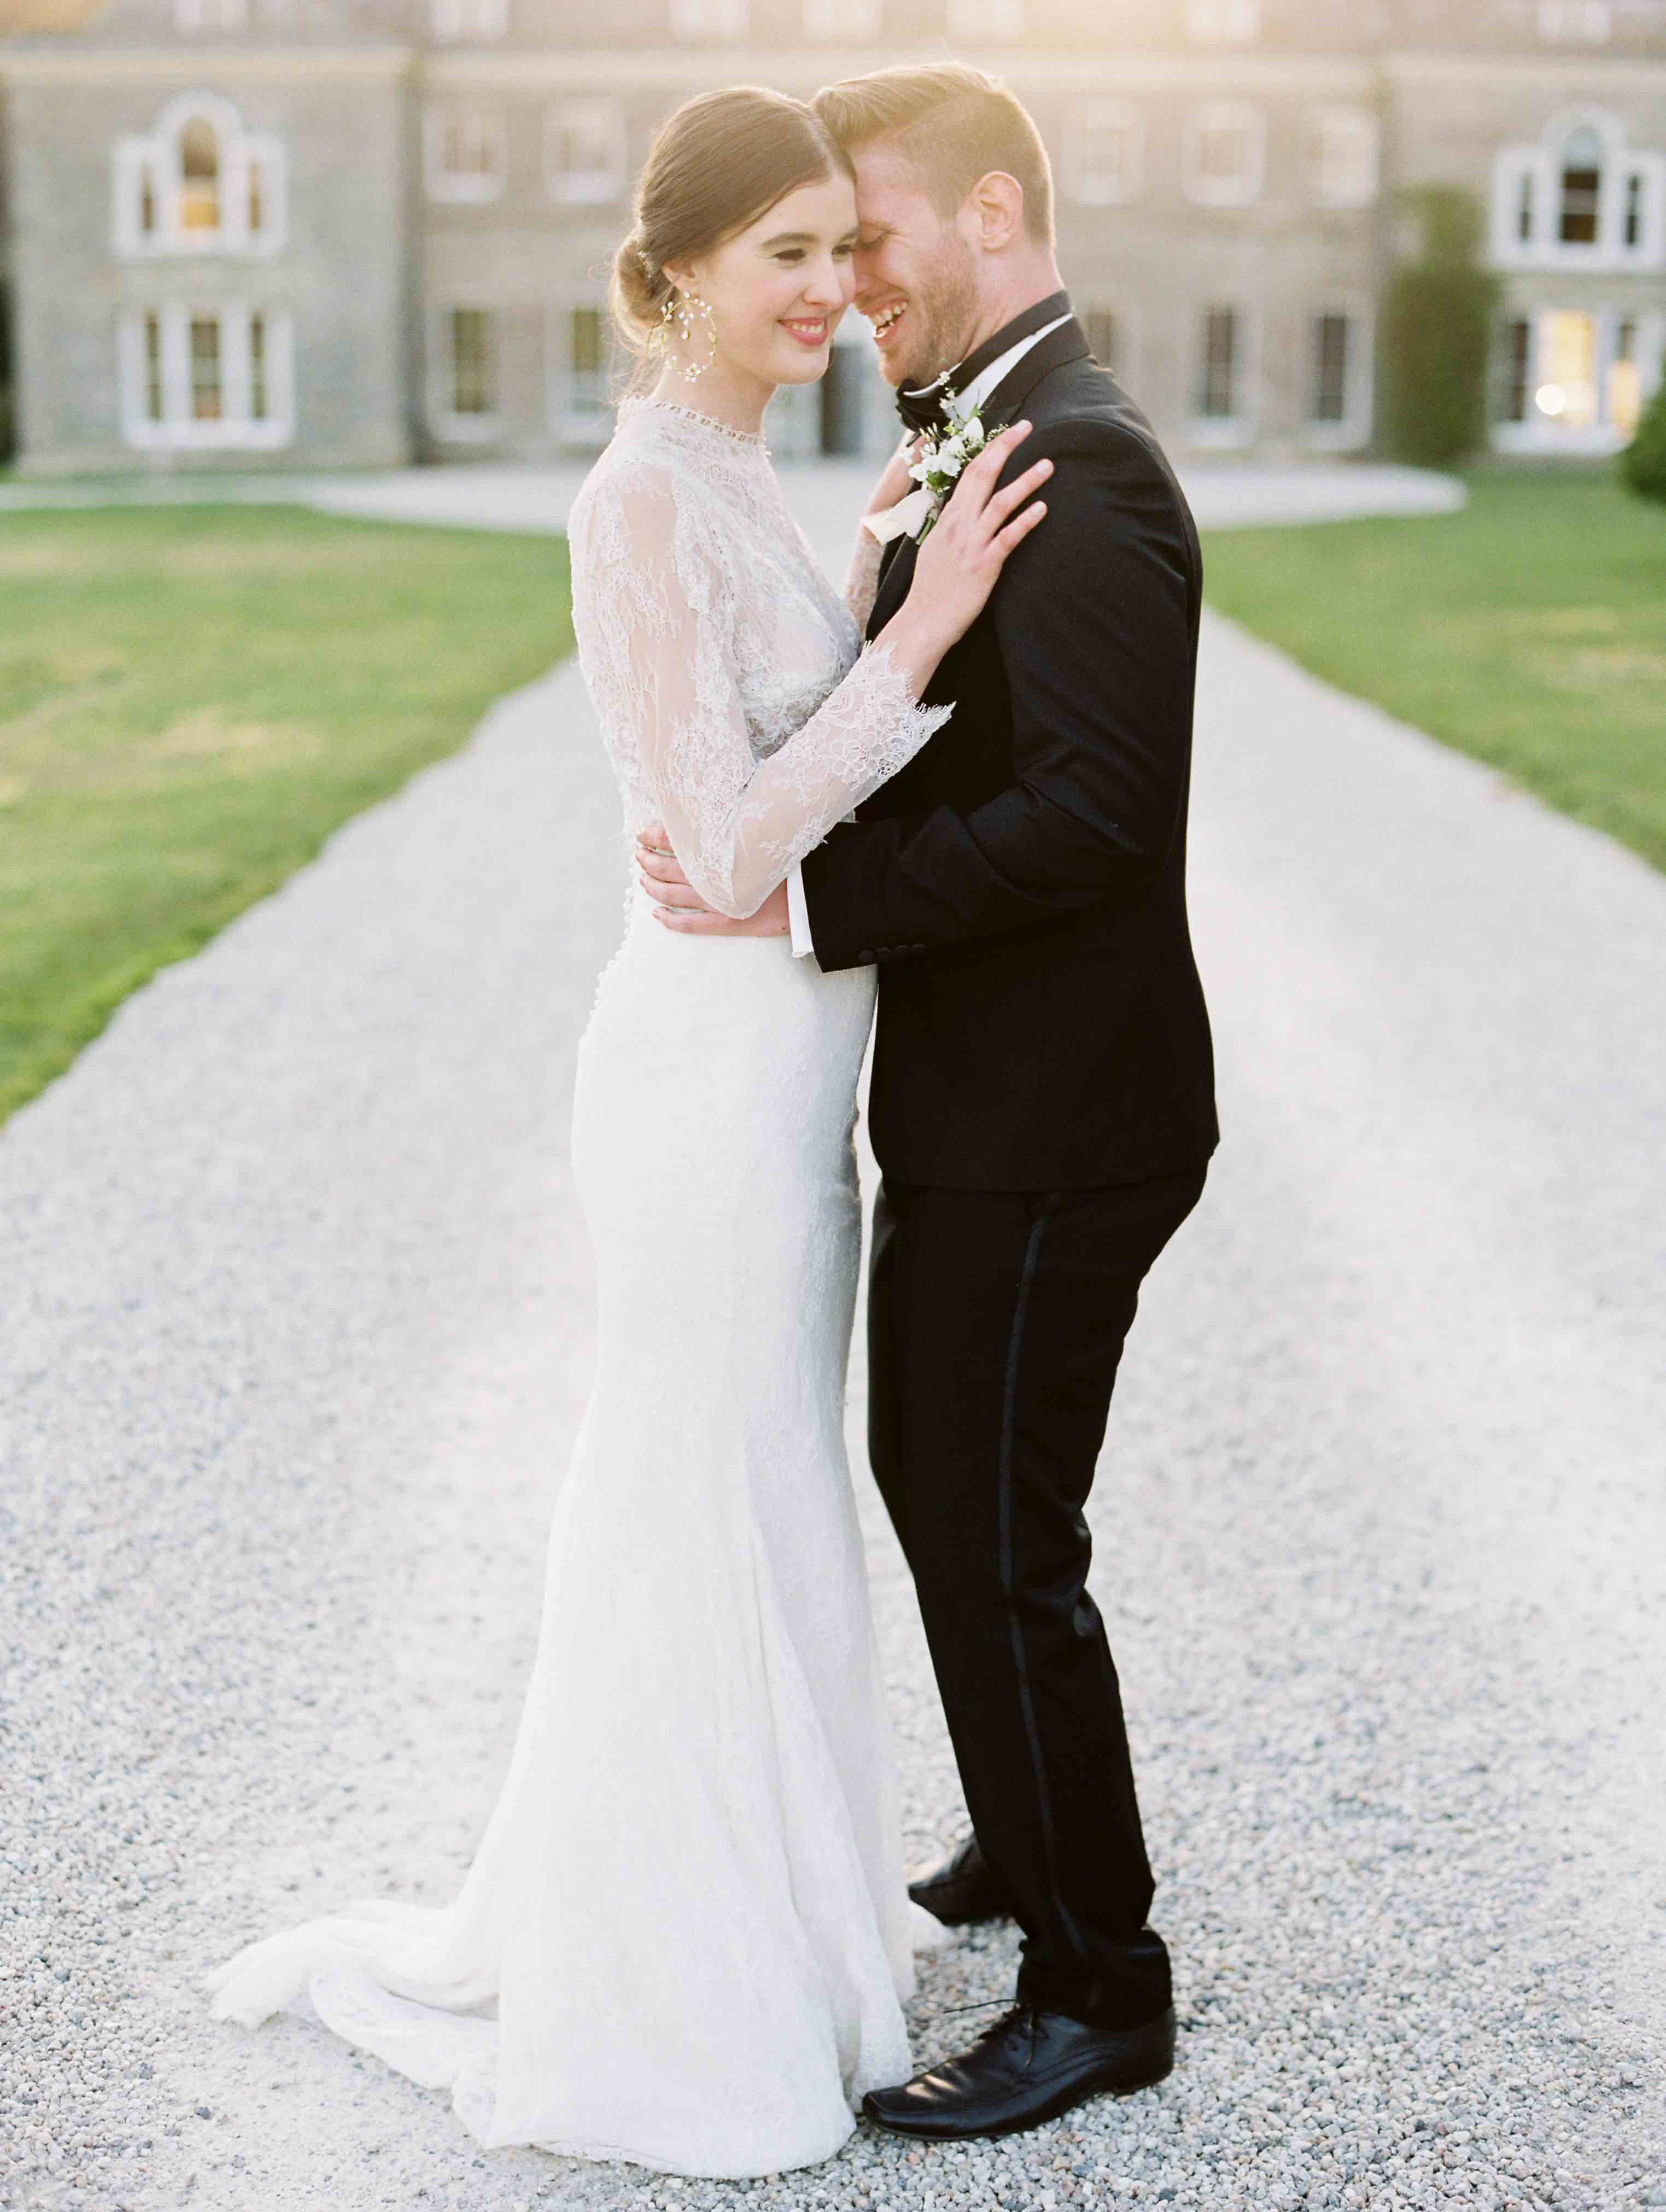 Bridal couple portrait at sunset for an English wedding | The Timeless Stylist | Hannah Duffy